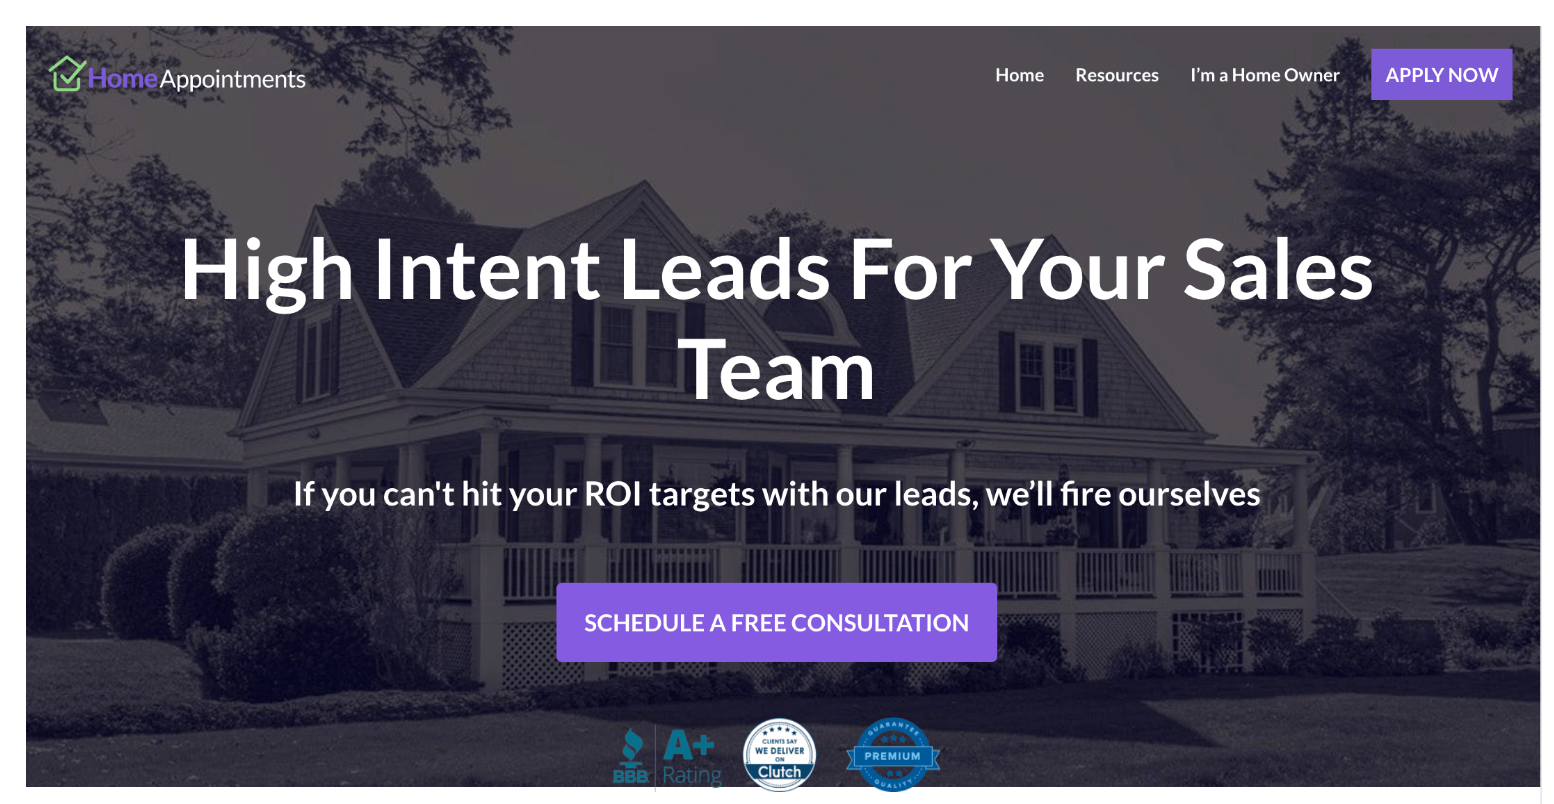 best lead generation websites for contractors - homeappointments